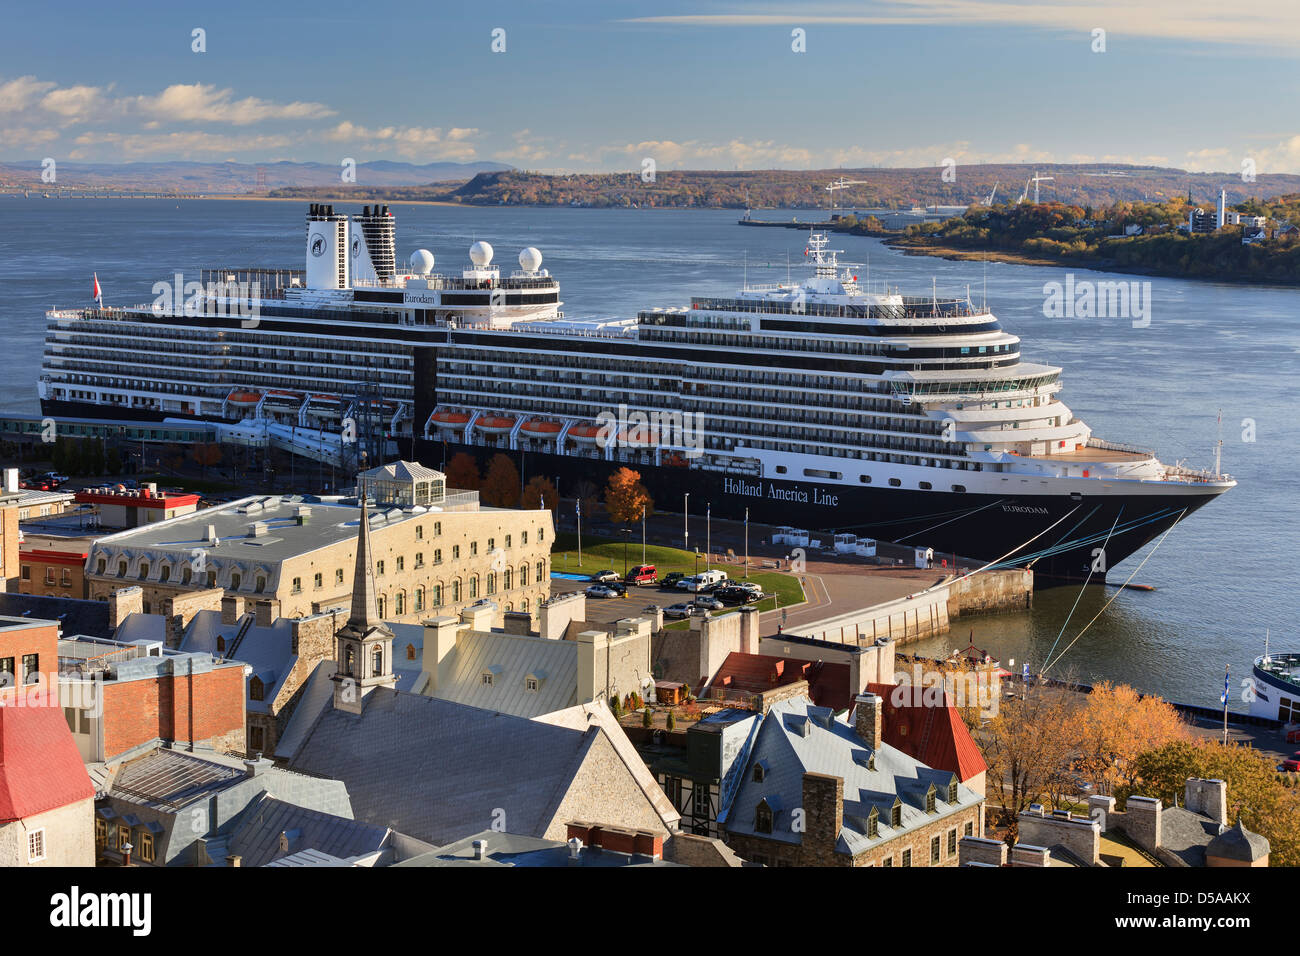 Cruise ship on the St. Lawrence River, docked in Old Quebec City, Quebec, Canada Stock Photo